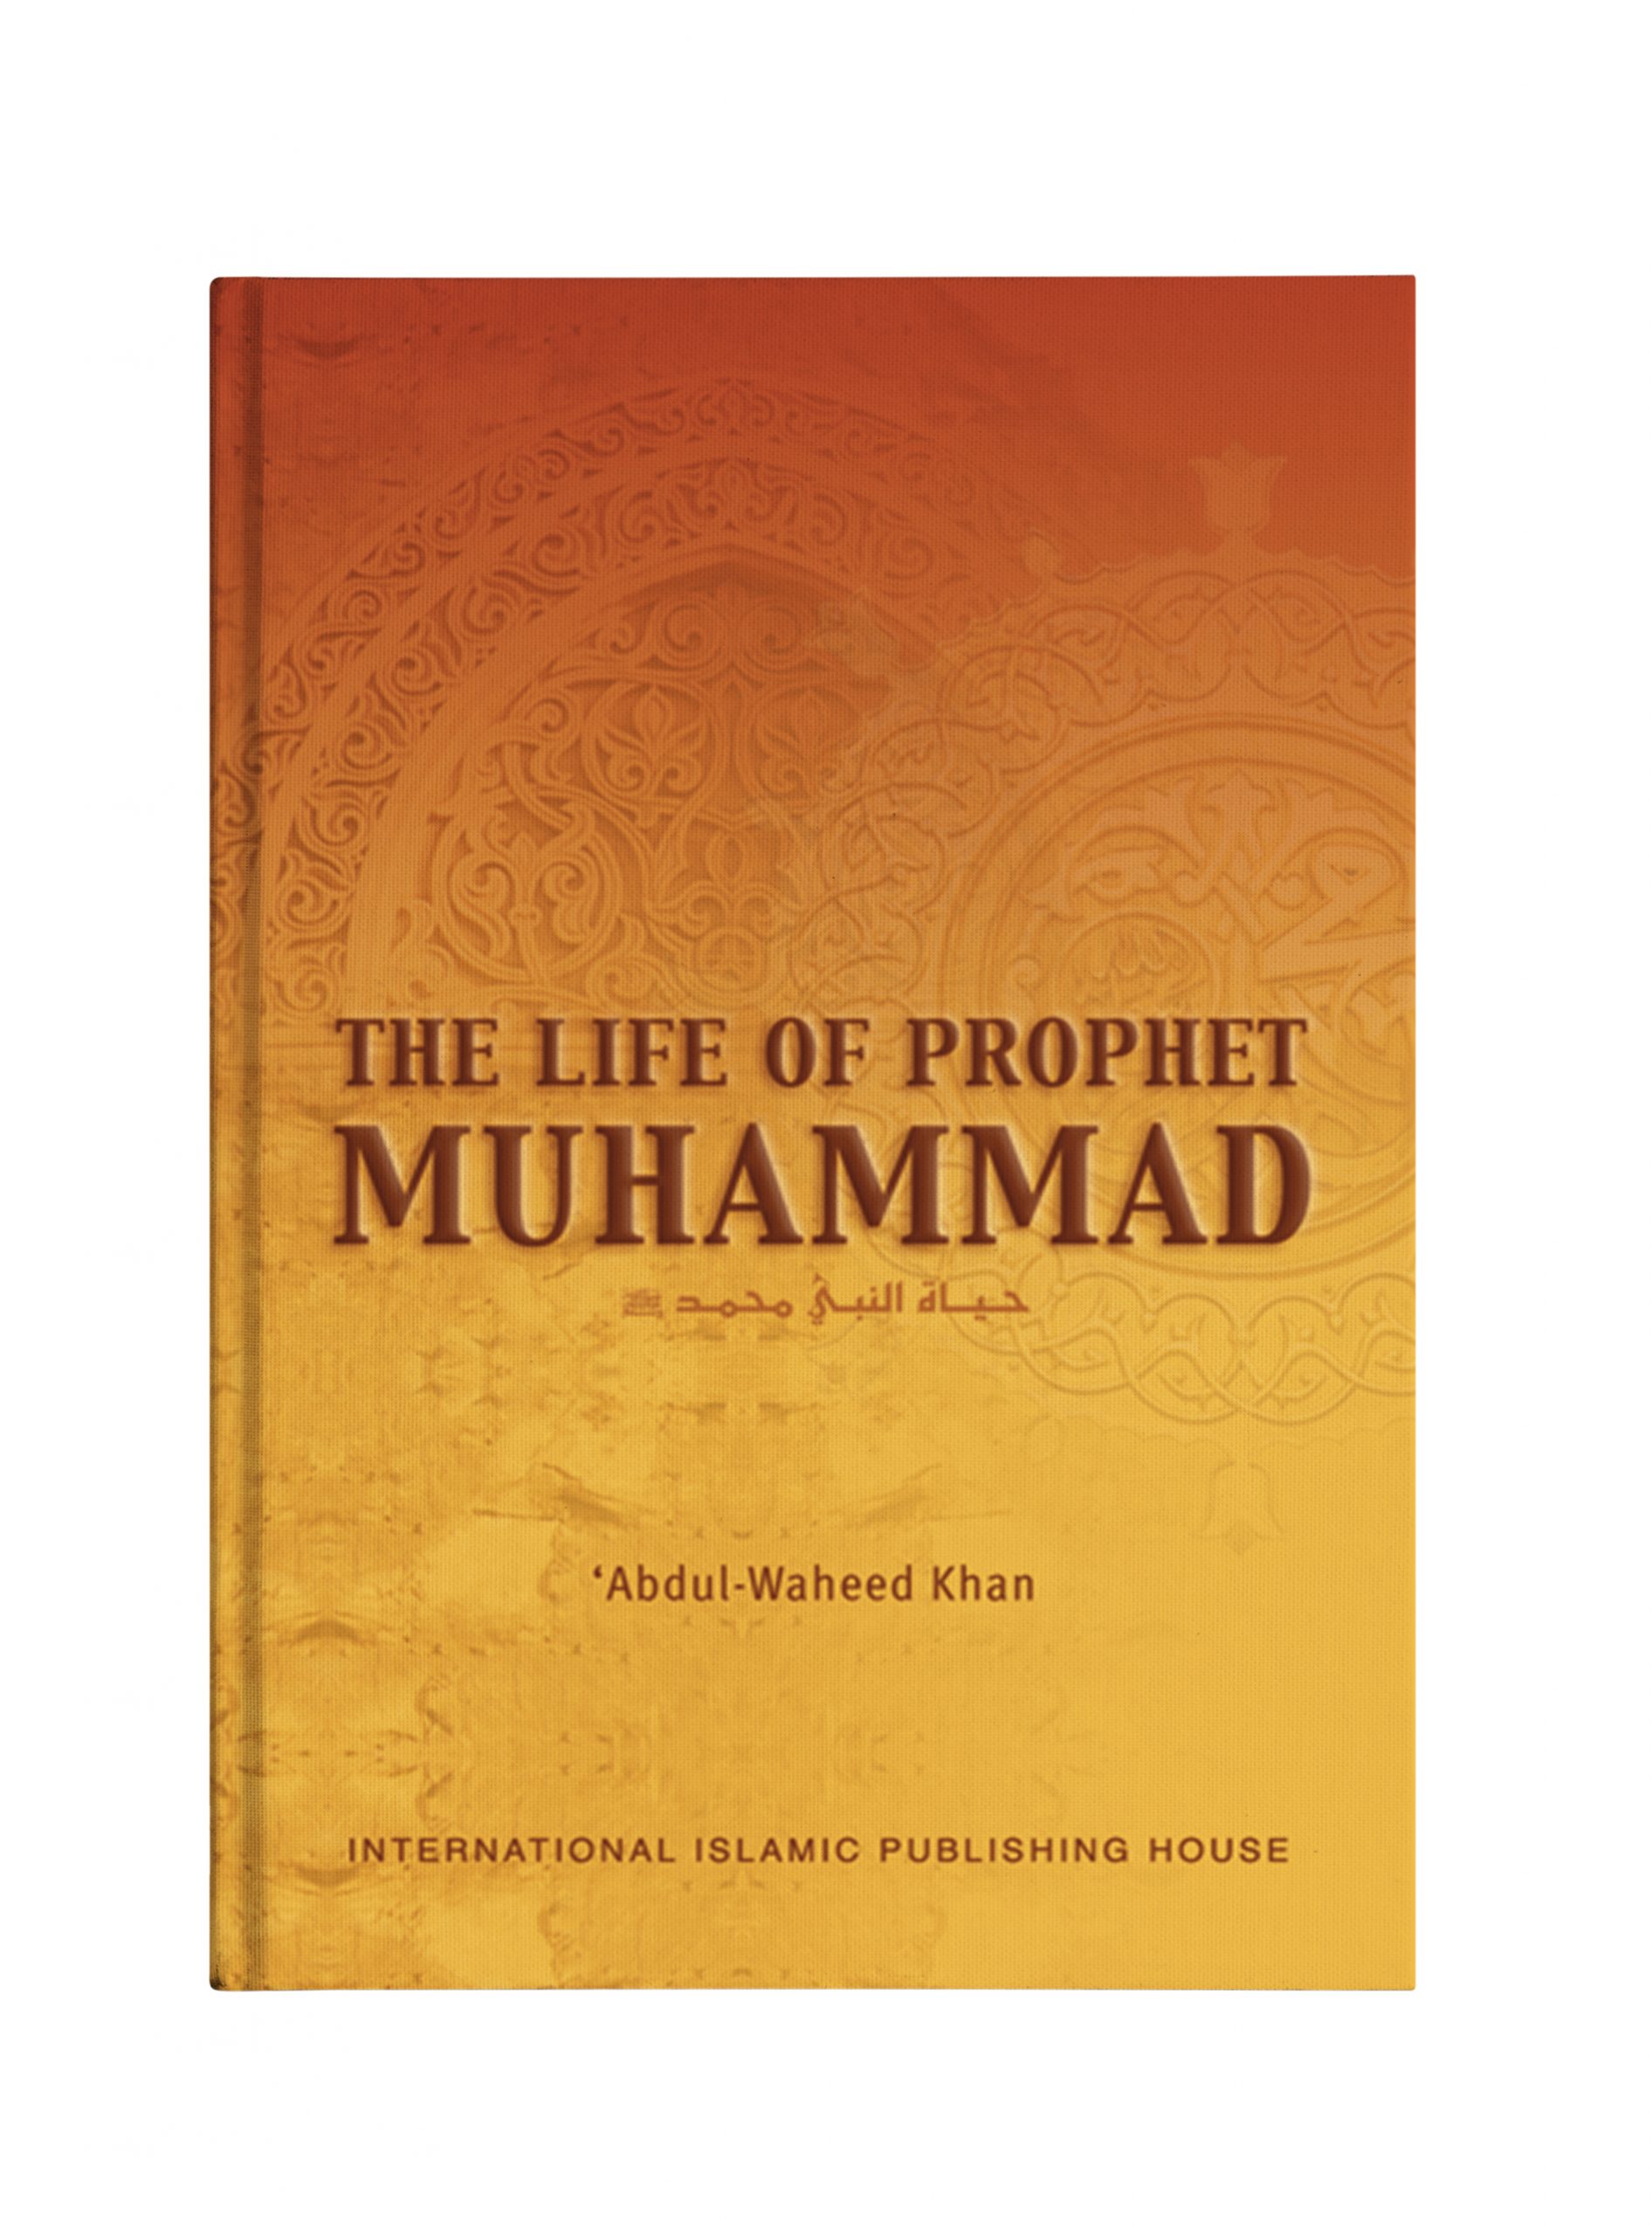 biography of prophet muhammad in english